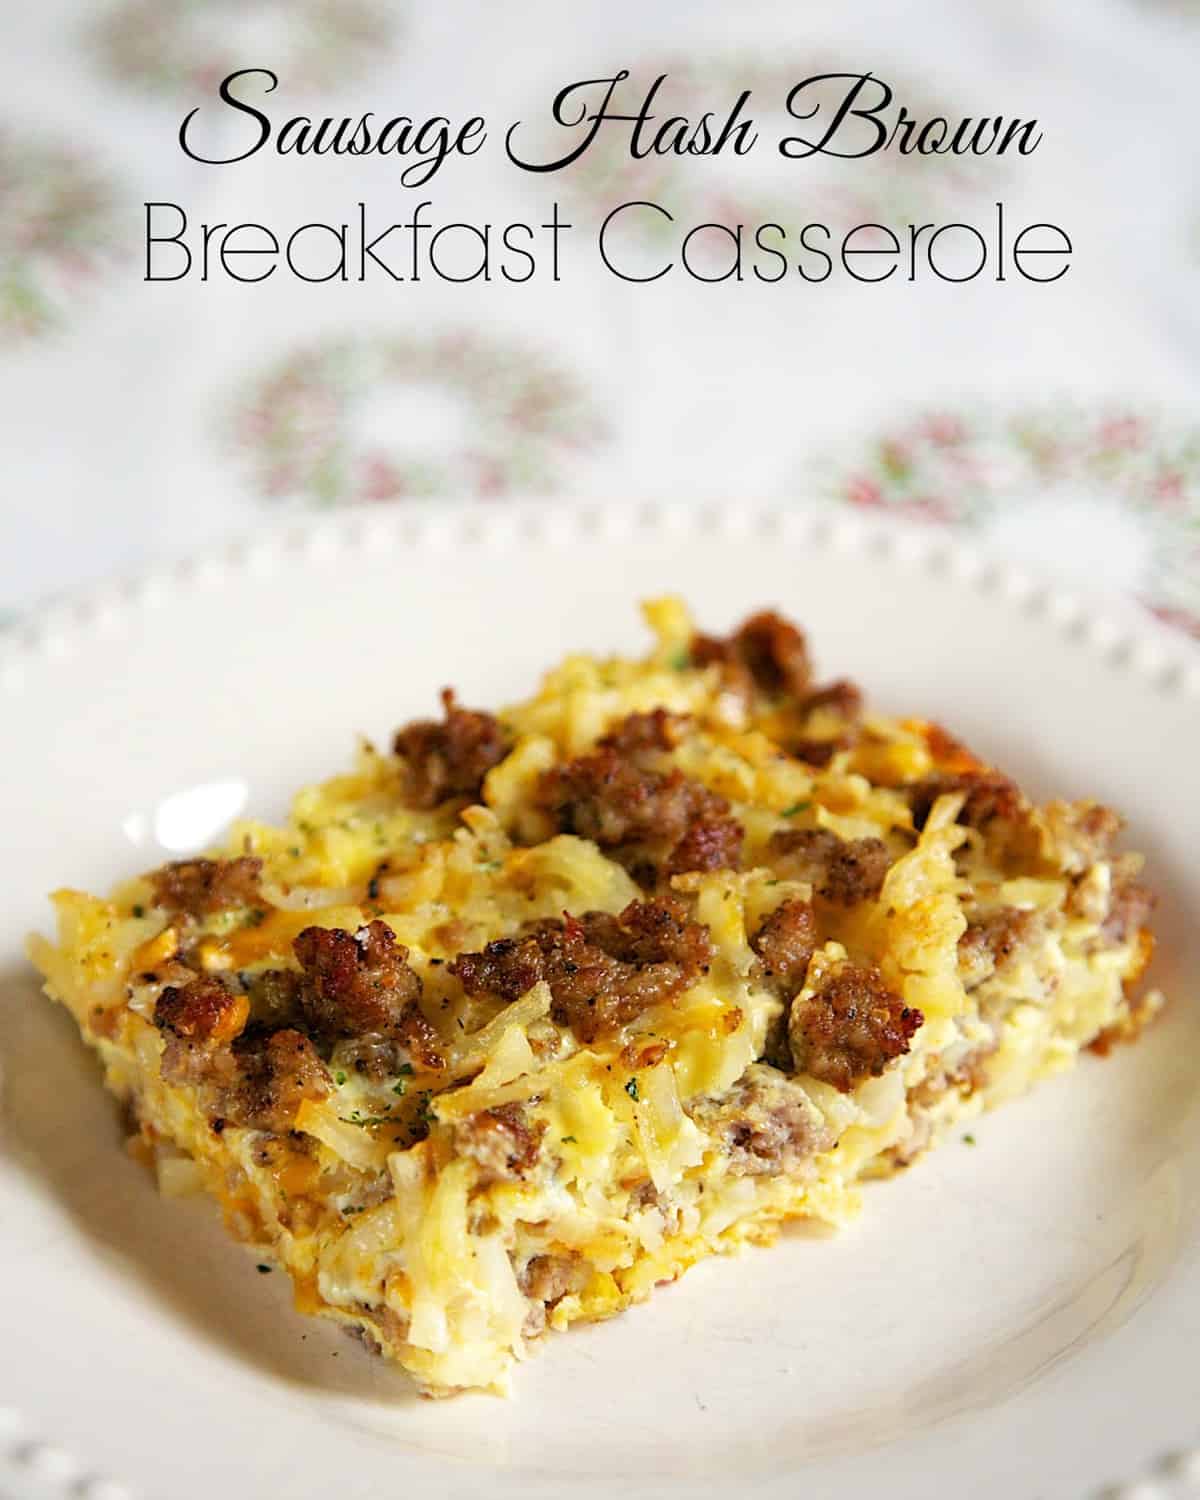 Sausage Hash Brown Breakfast Casserole - hash browns, sausage, eggs & cheese - can be made ahead of time and refrigerated until ready! Great for overnight guest and Christmas morning!